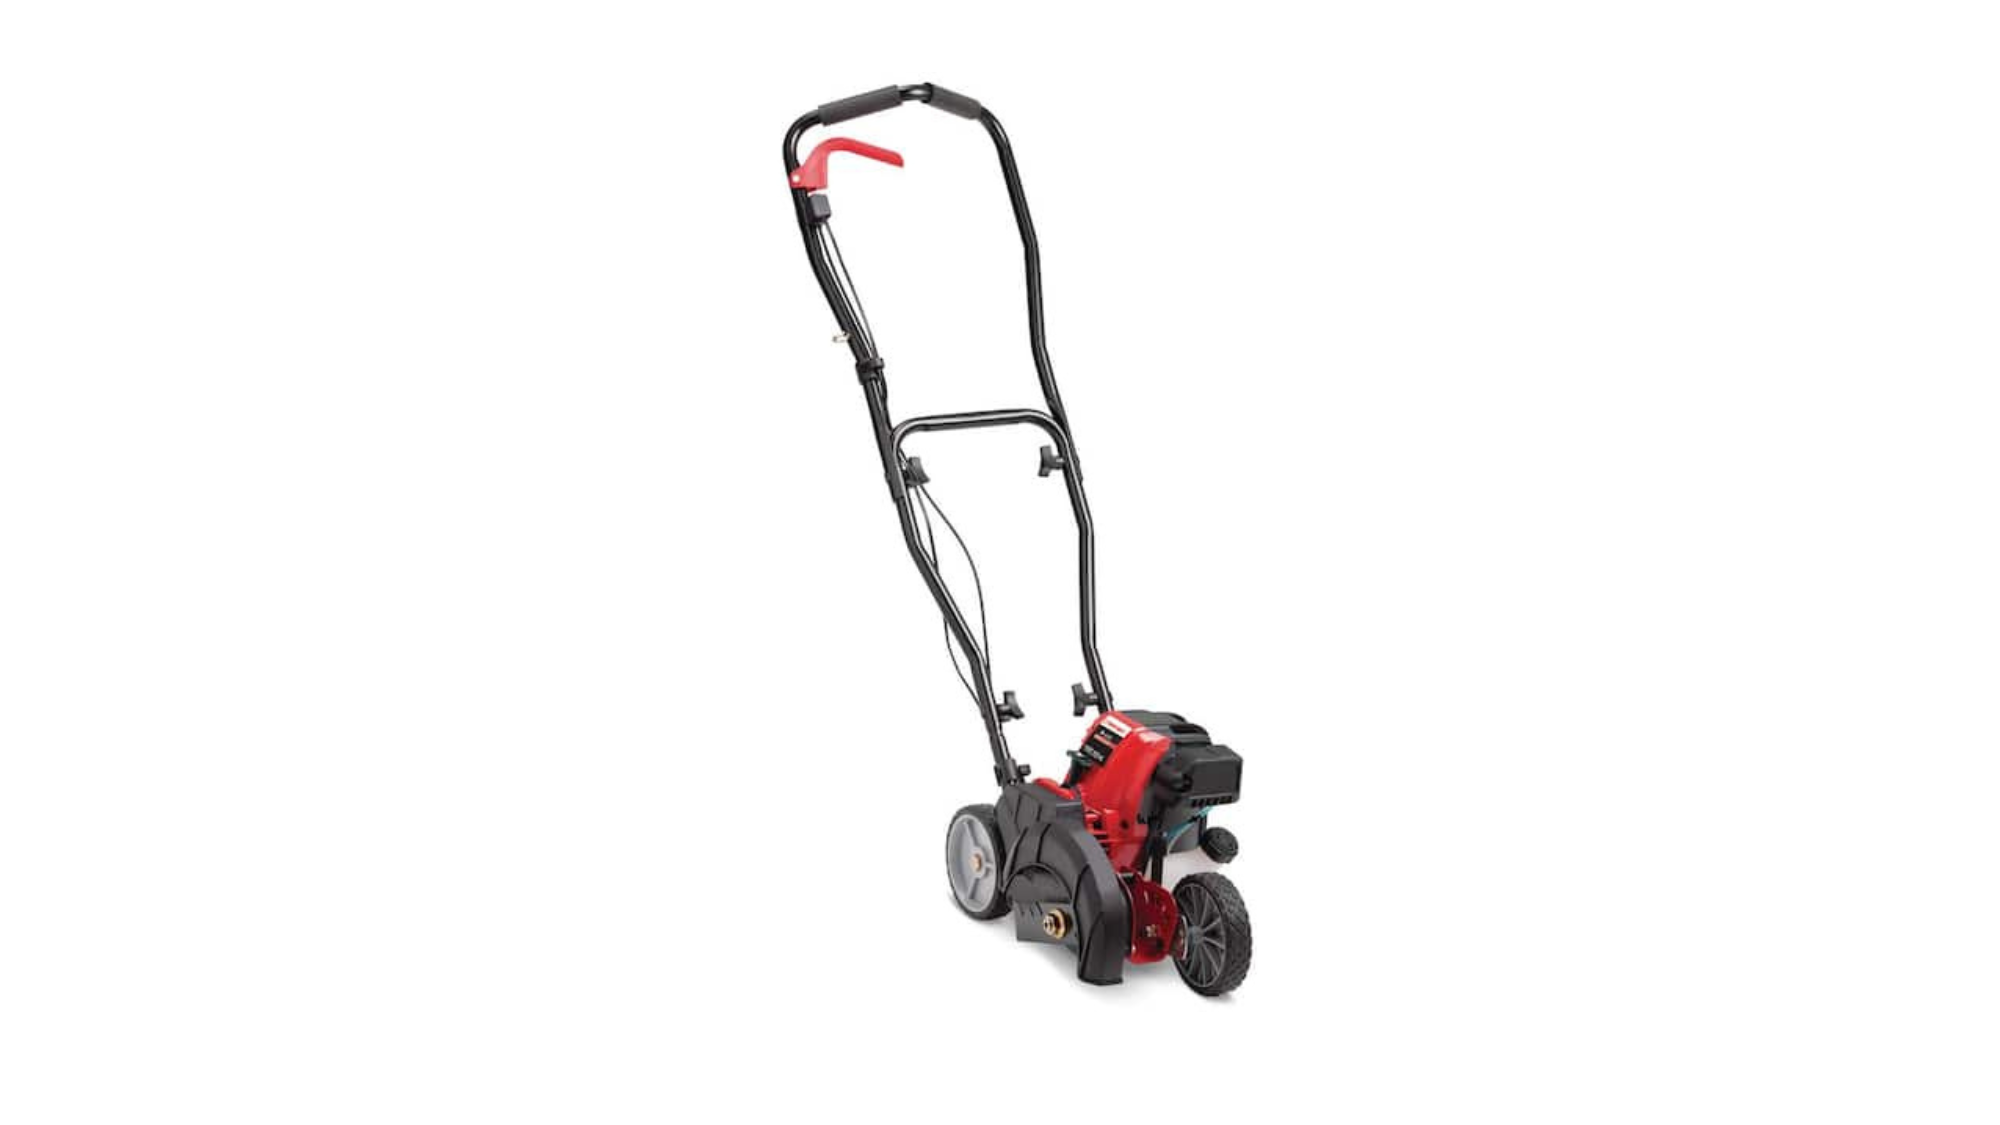 Red and black Troy-Bilt 30 cc 4-Stroke Gas Lawn Edger on white background